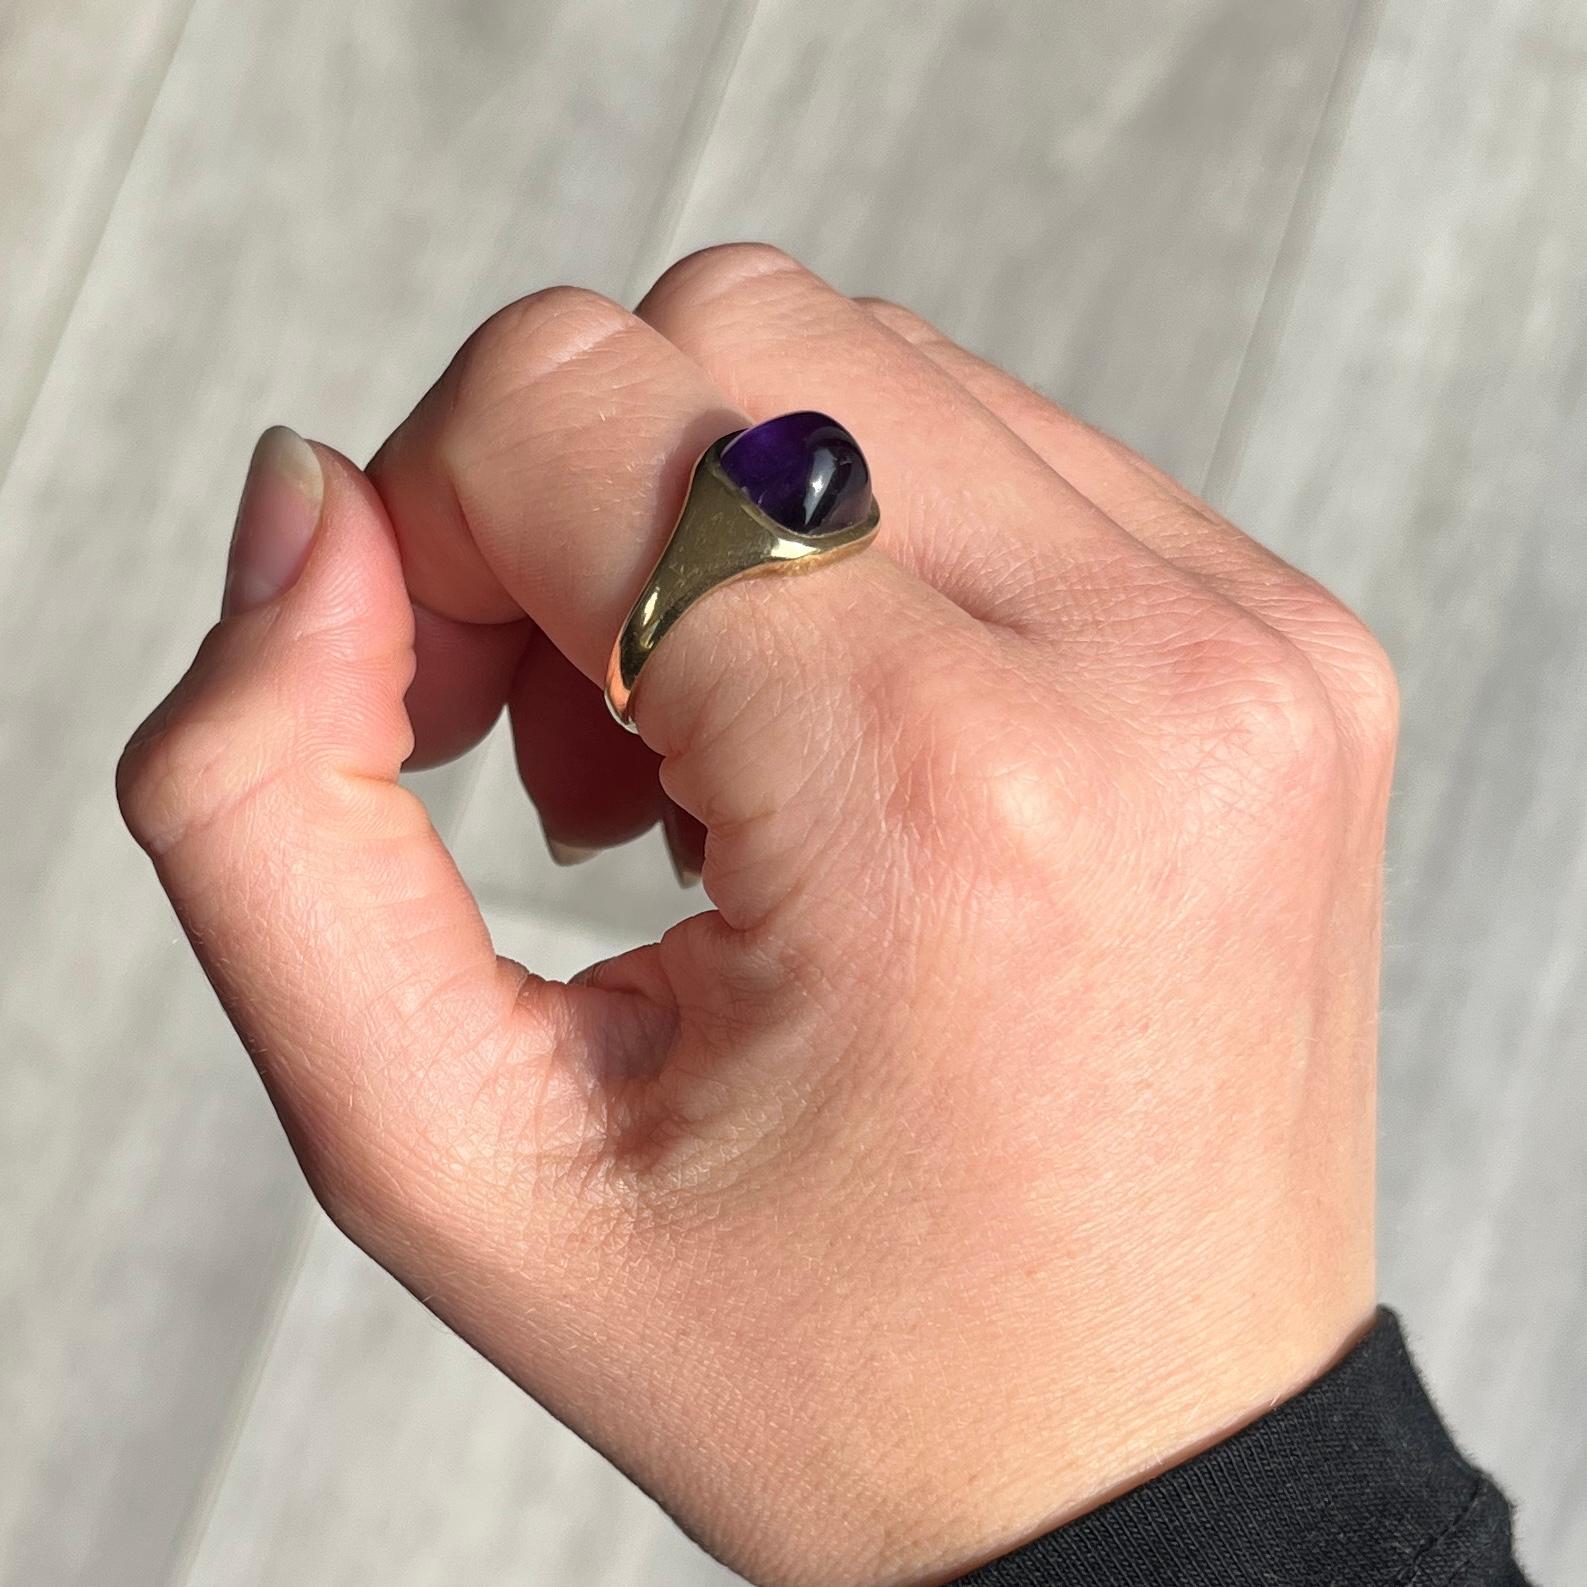 This glossy and bright purple amethyst stone is surrounded by a delicate frame of gold. Modelled in 9ct gold. Fully hallmarked London 1972.

Ring Size: R or 8 1/2 
Stone Diameter: 9mm 
Height off finger: 6.5mm

Weight: 4g